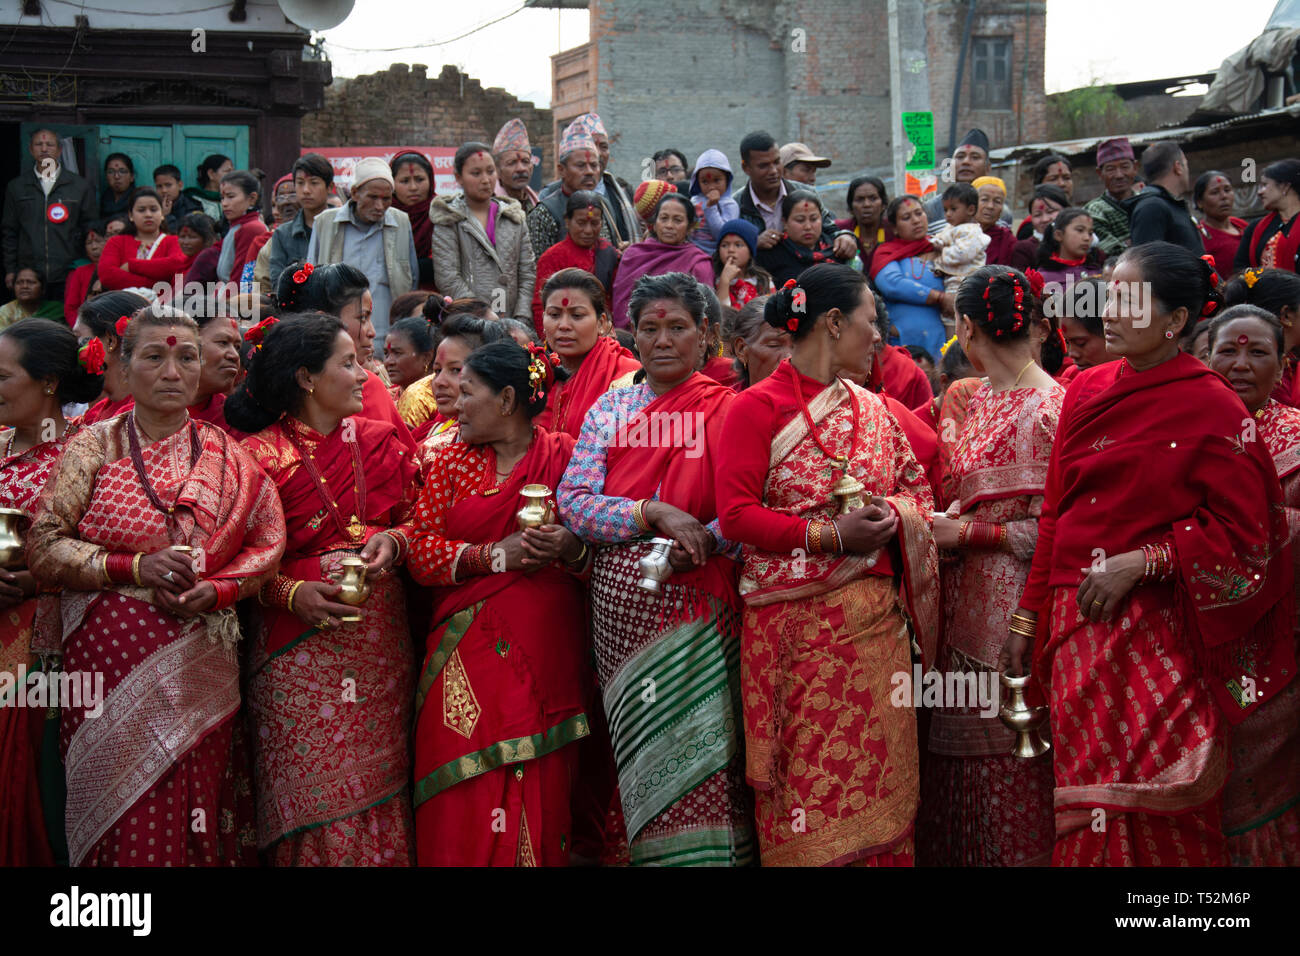 Kathmandu, Nepal - February 03, 2017: A group of local women in traditional dress gather to celebrate the festival called 'Lala Saptami'. Stock Photo